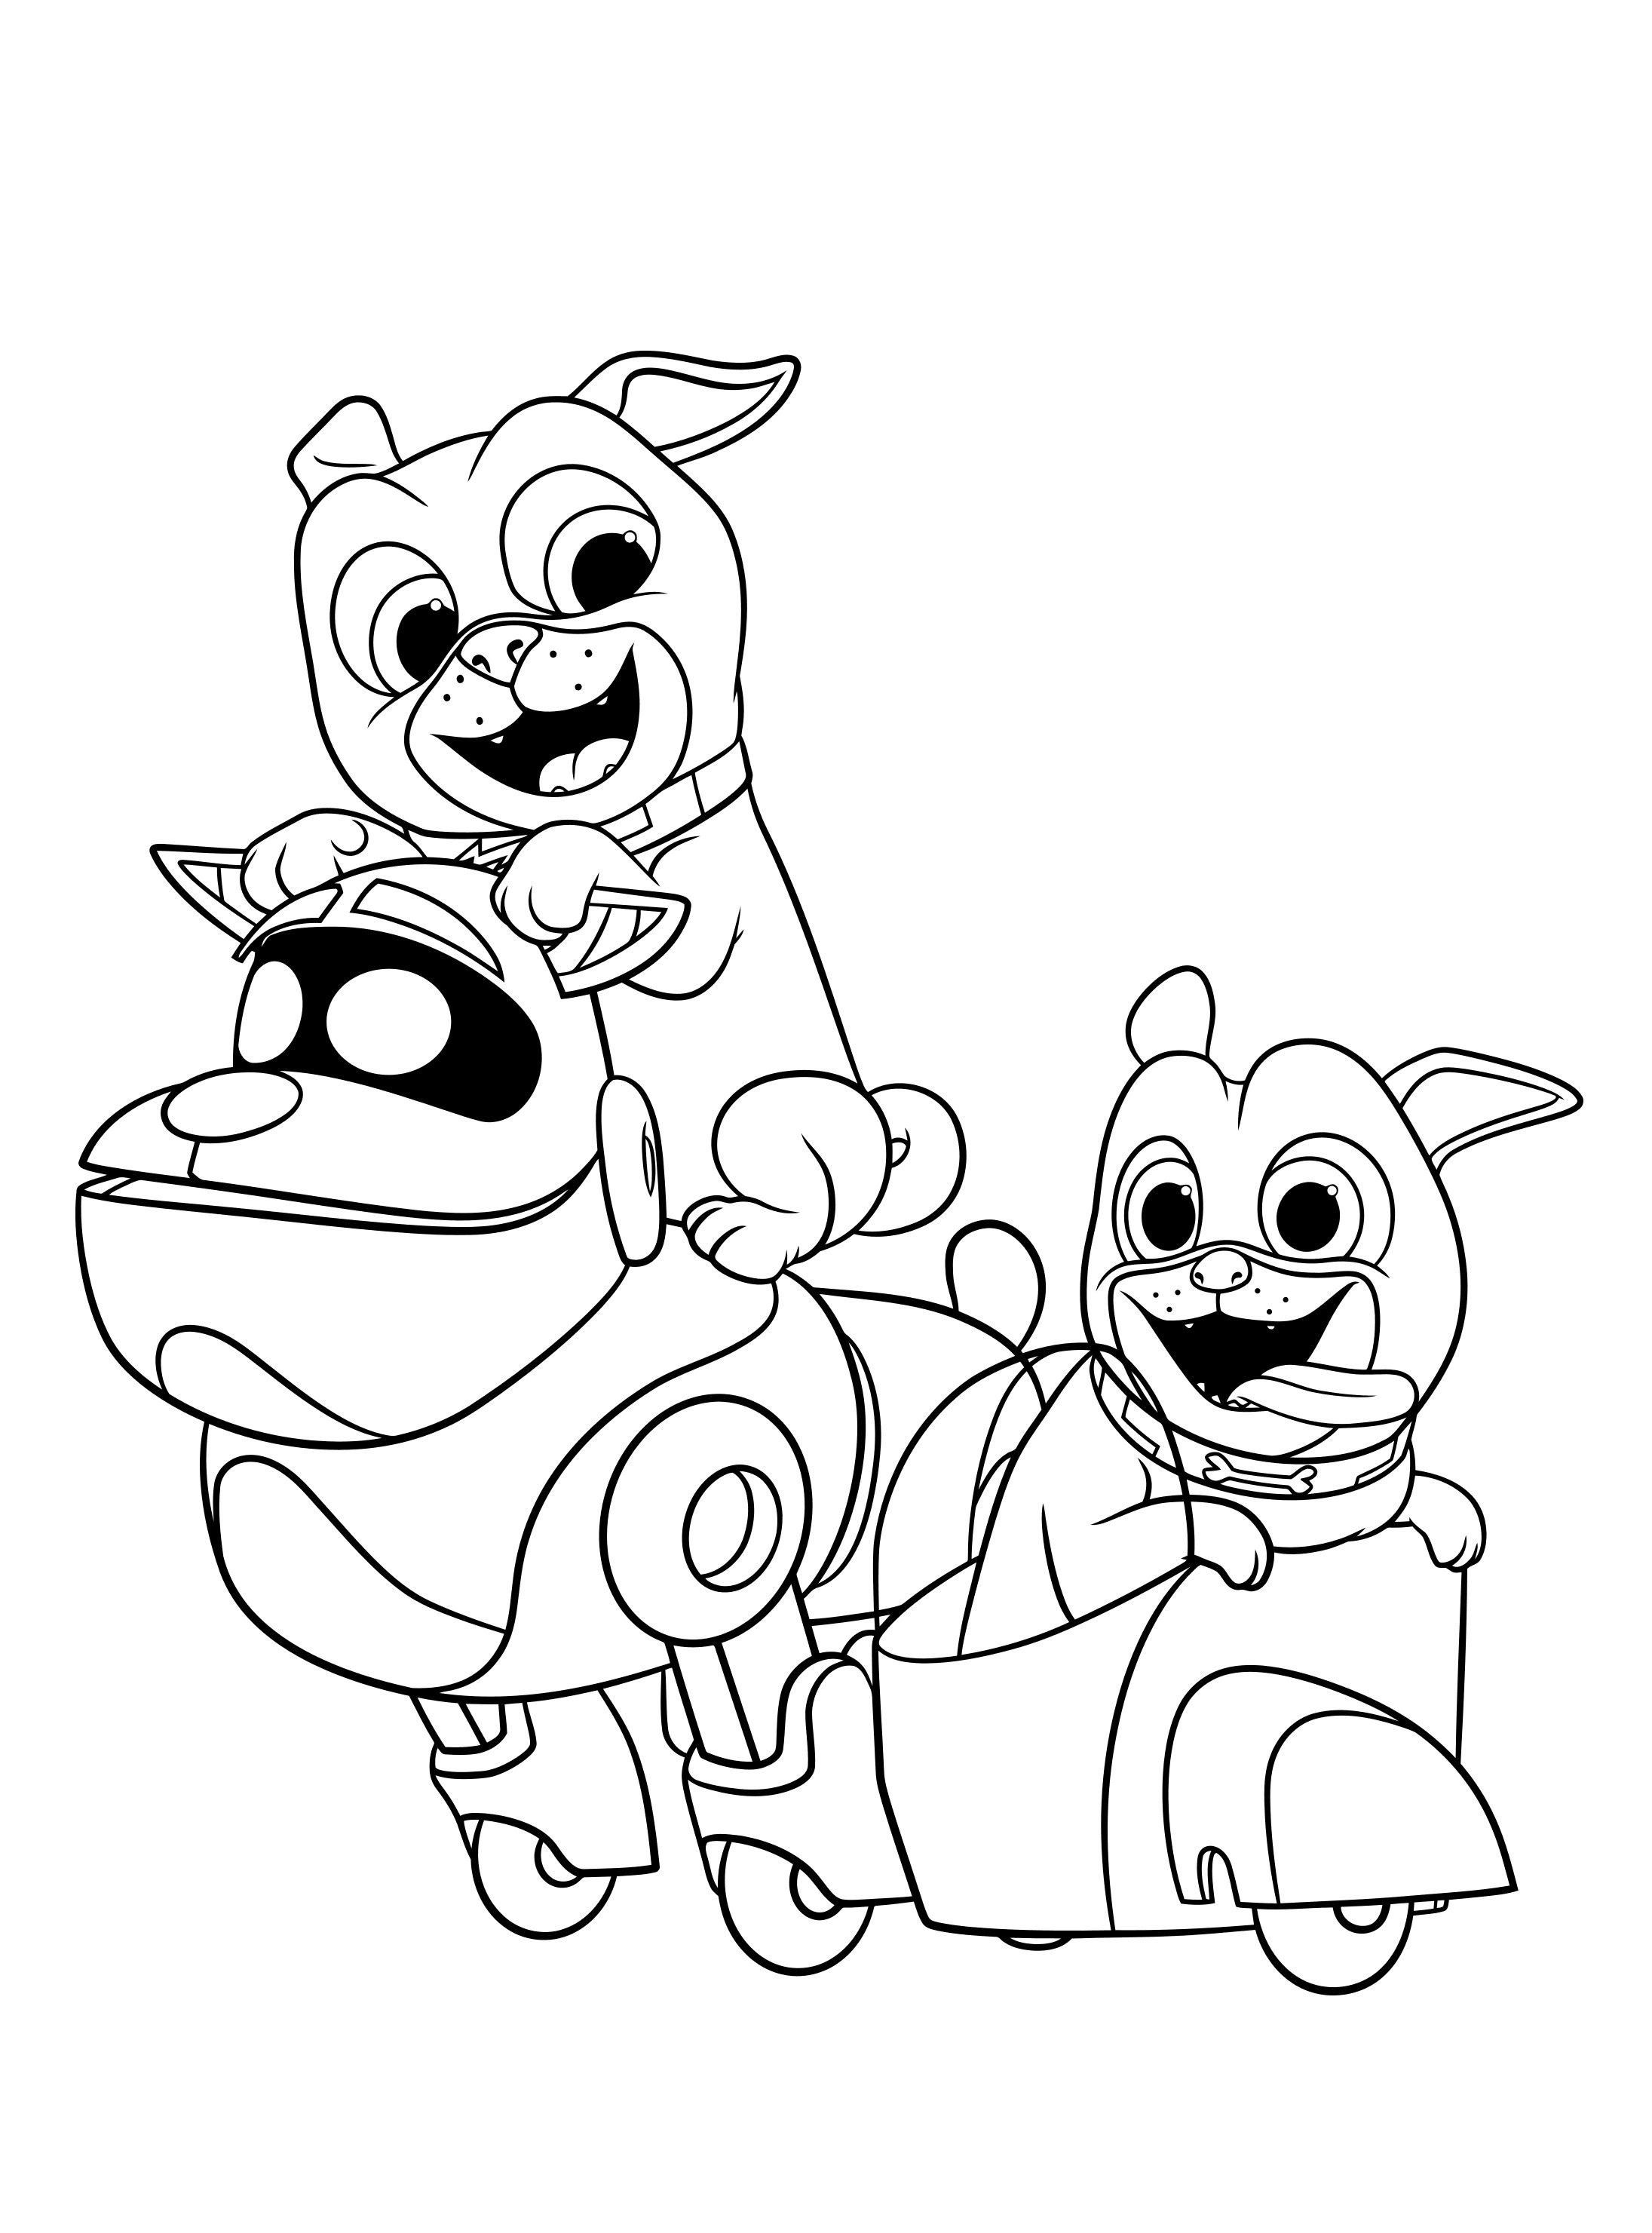 Puppy Dog Pals and ARF colouring page